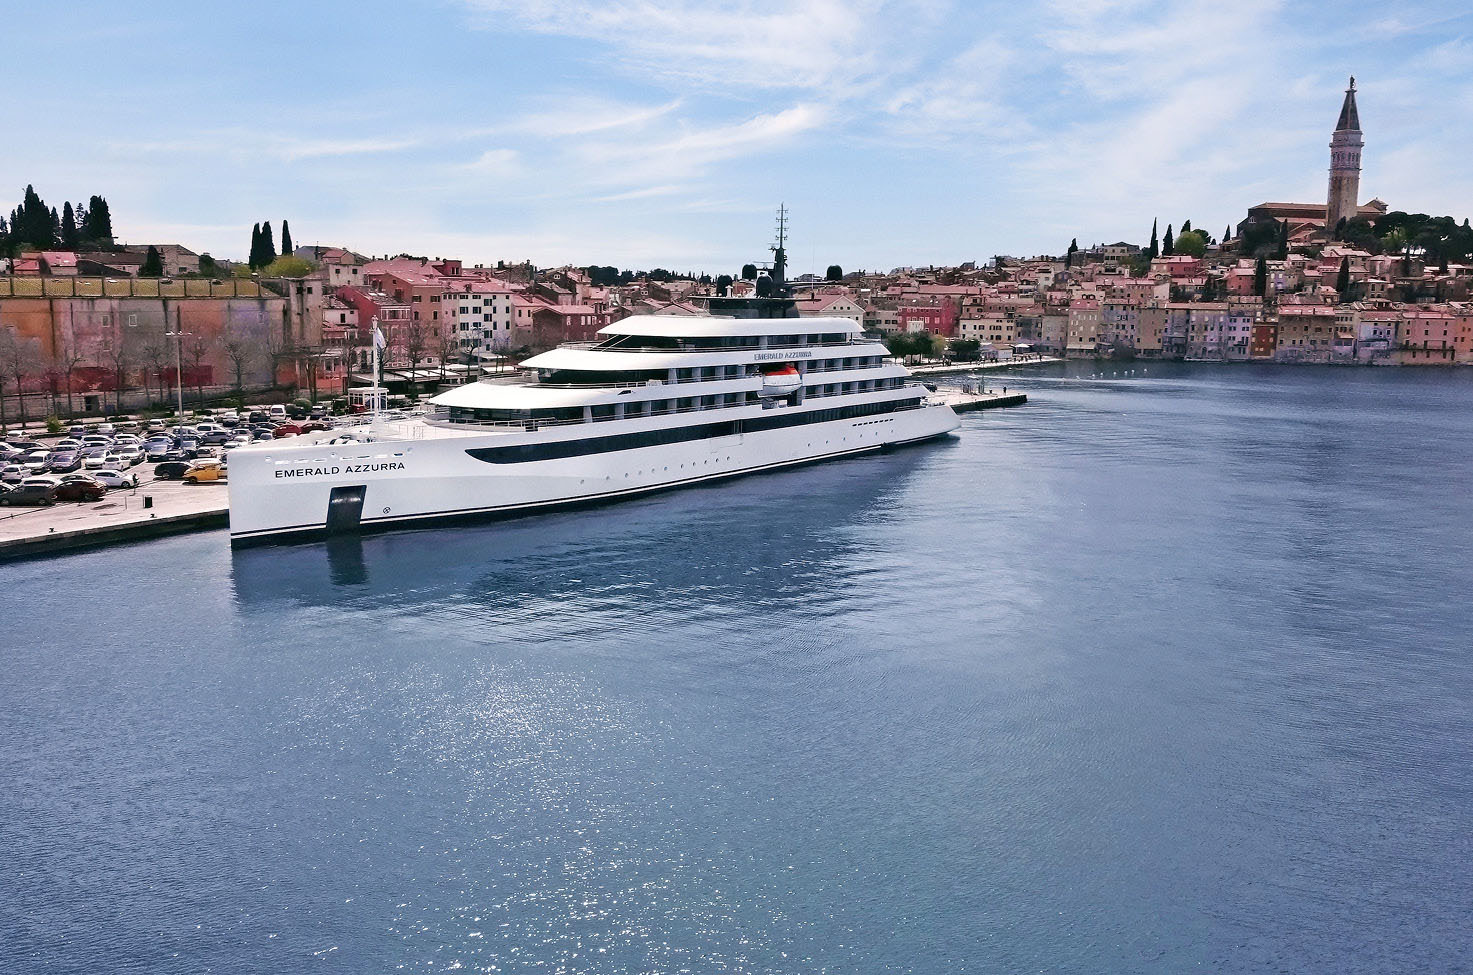 Luxury yacht docked in calm water next to a harbour in Rovinj near buildings